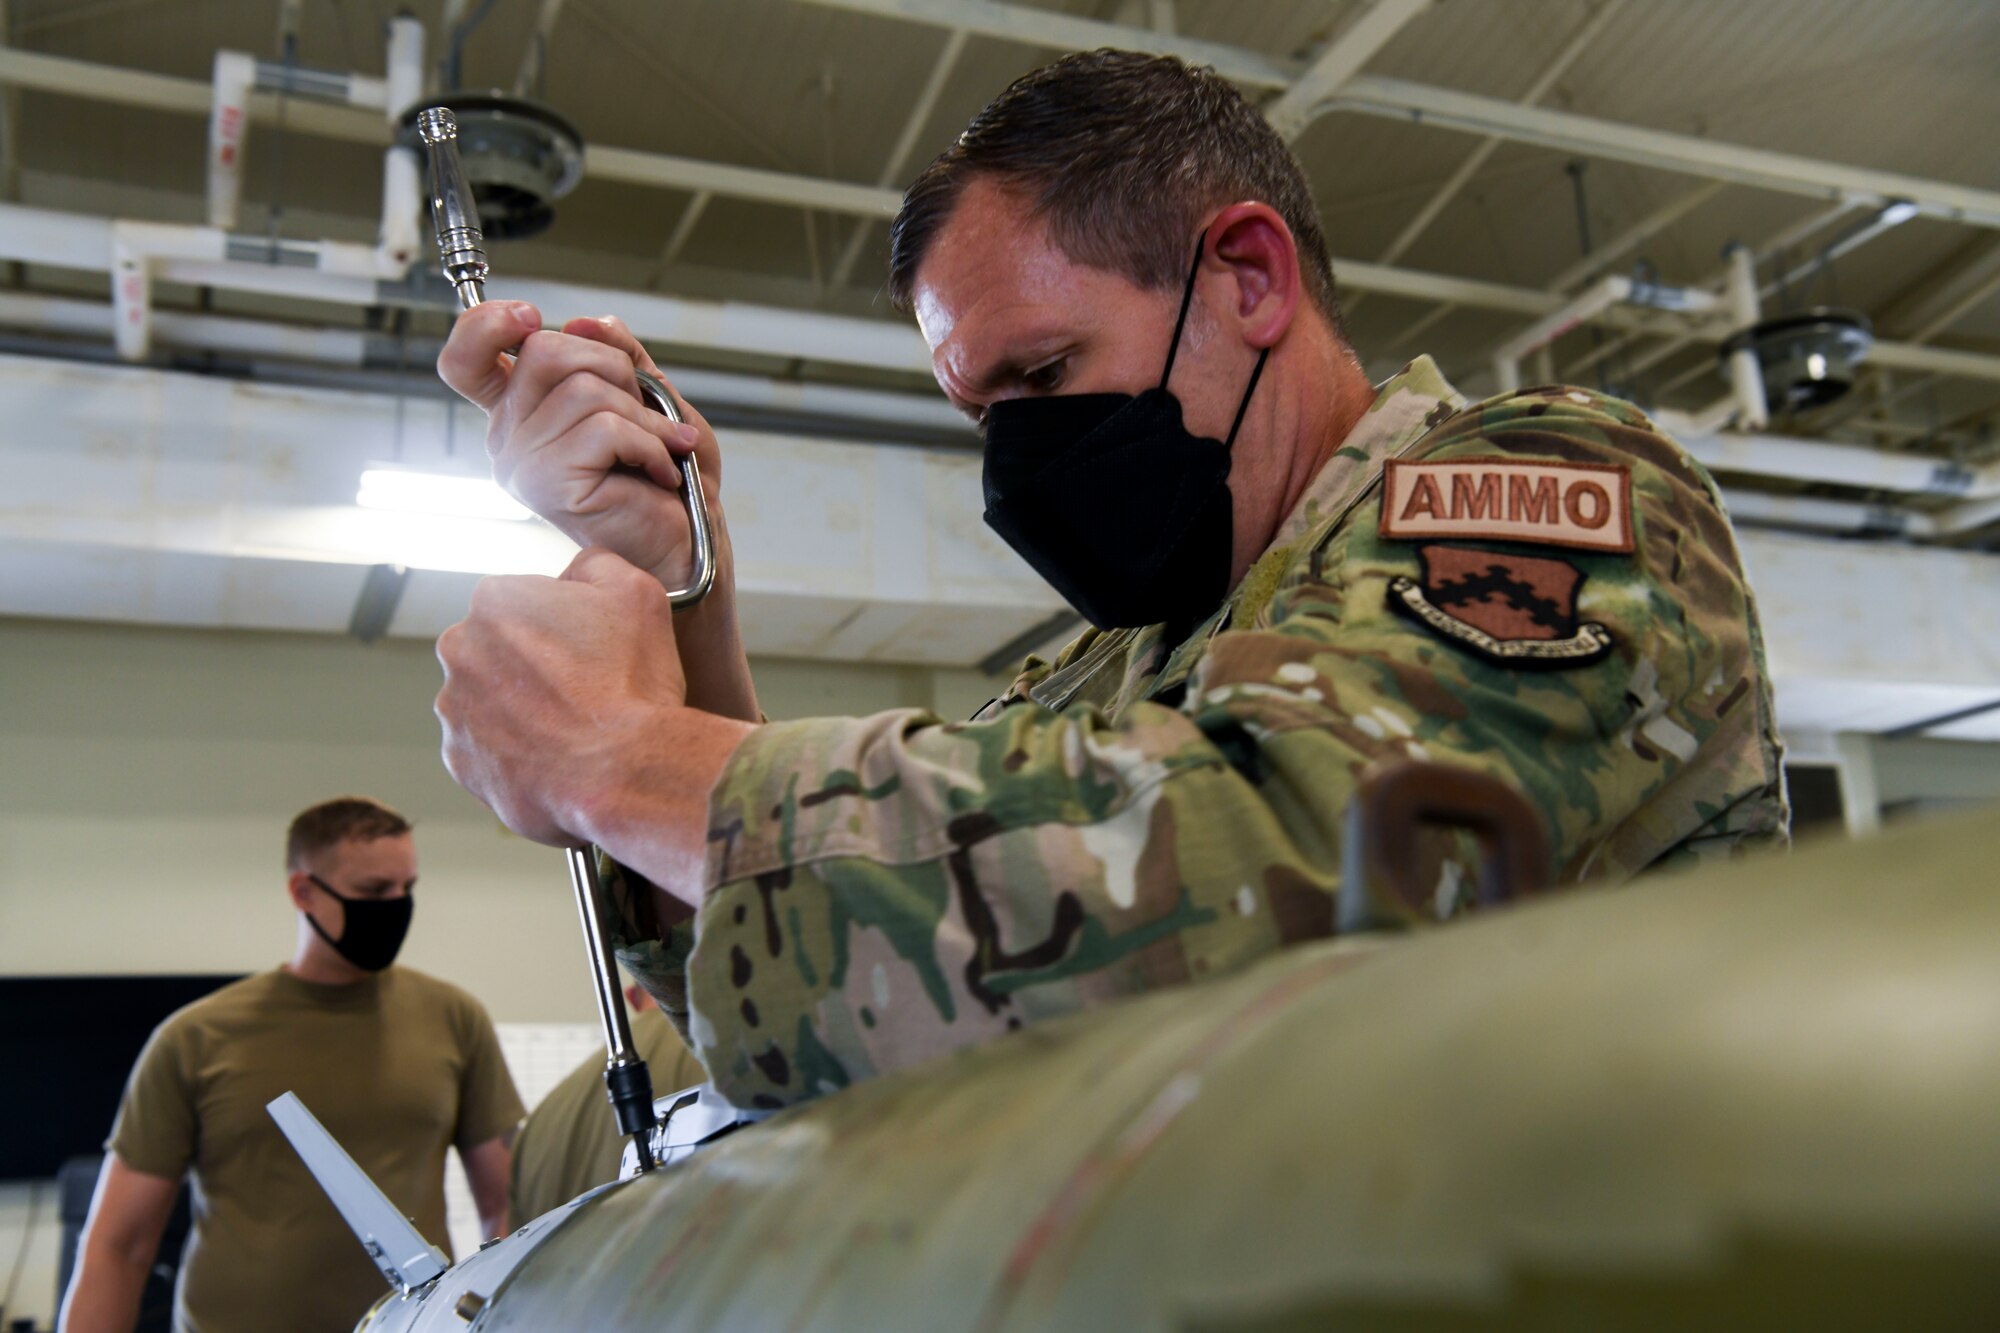 A commander works on a munition.